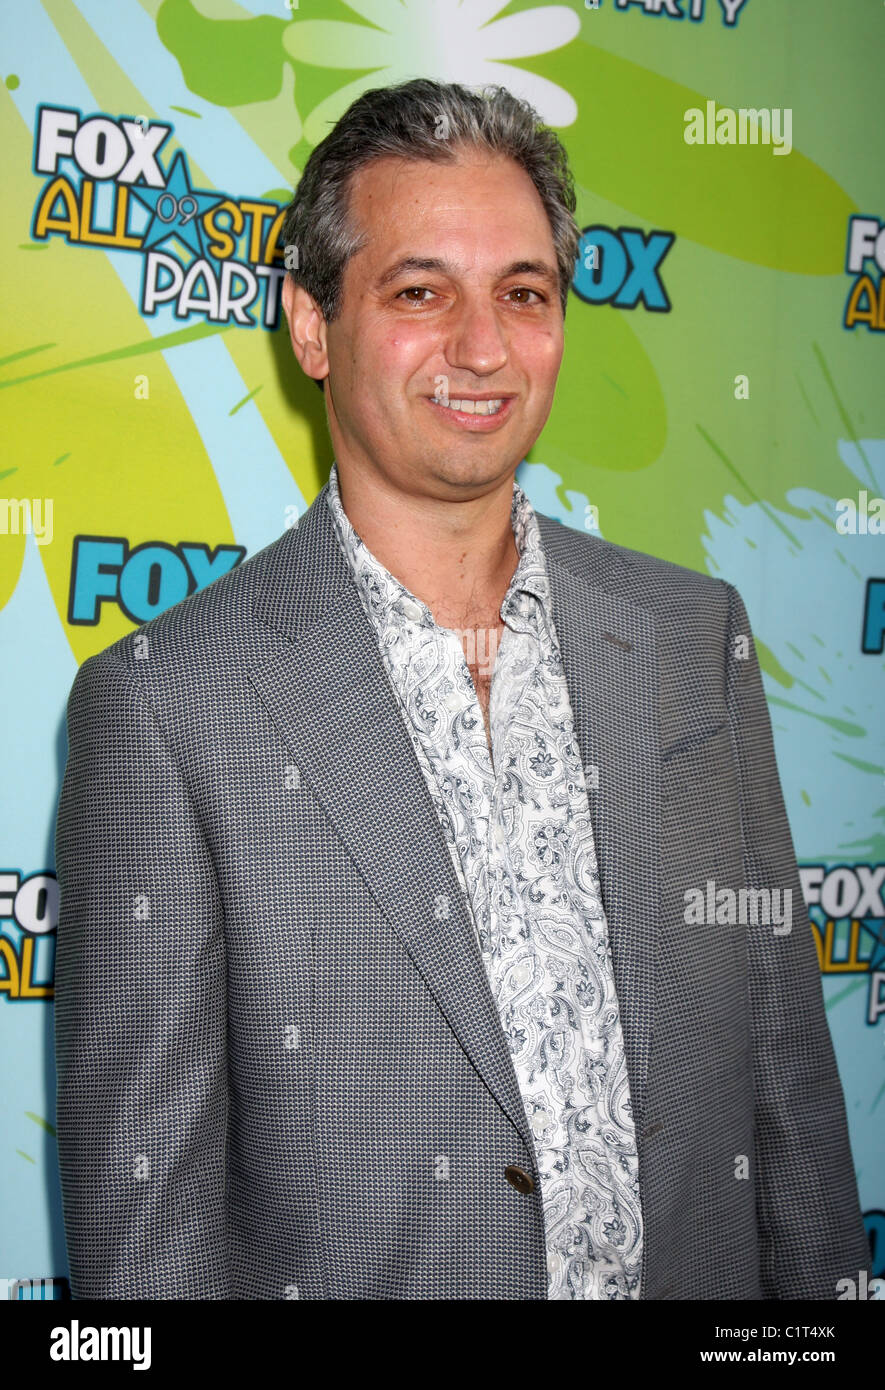 David Shore The 2009 TCA Summer Tour - Fox All-Star Party at The Langham Hotel and Spa - Arrivals Pasadena, California - Stock Photo